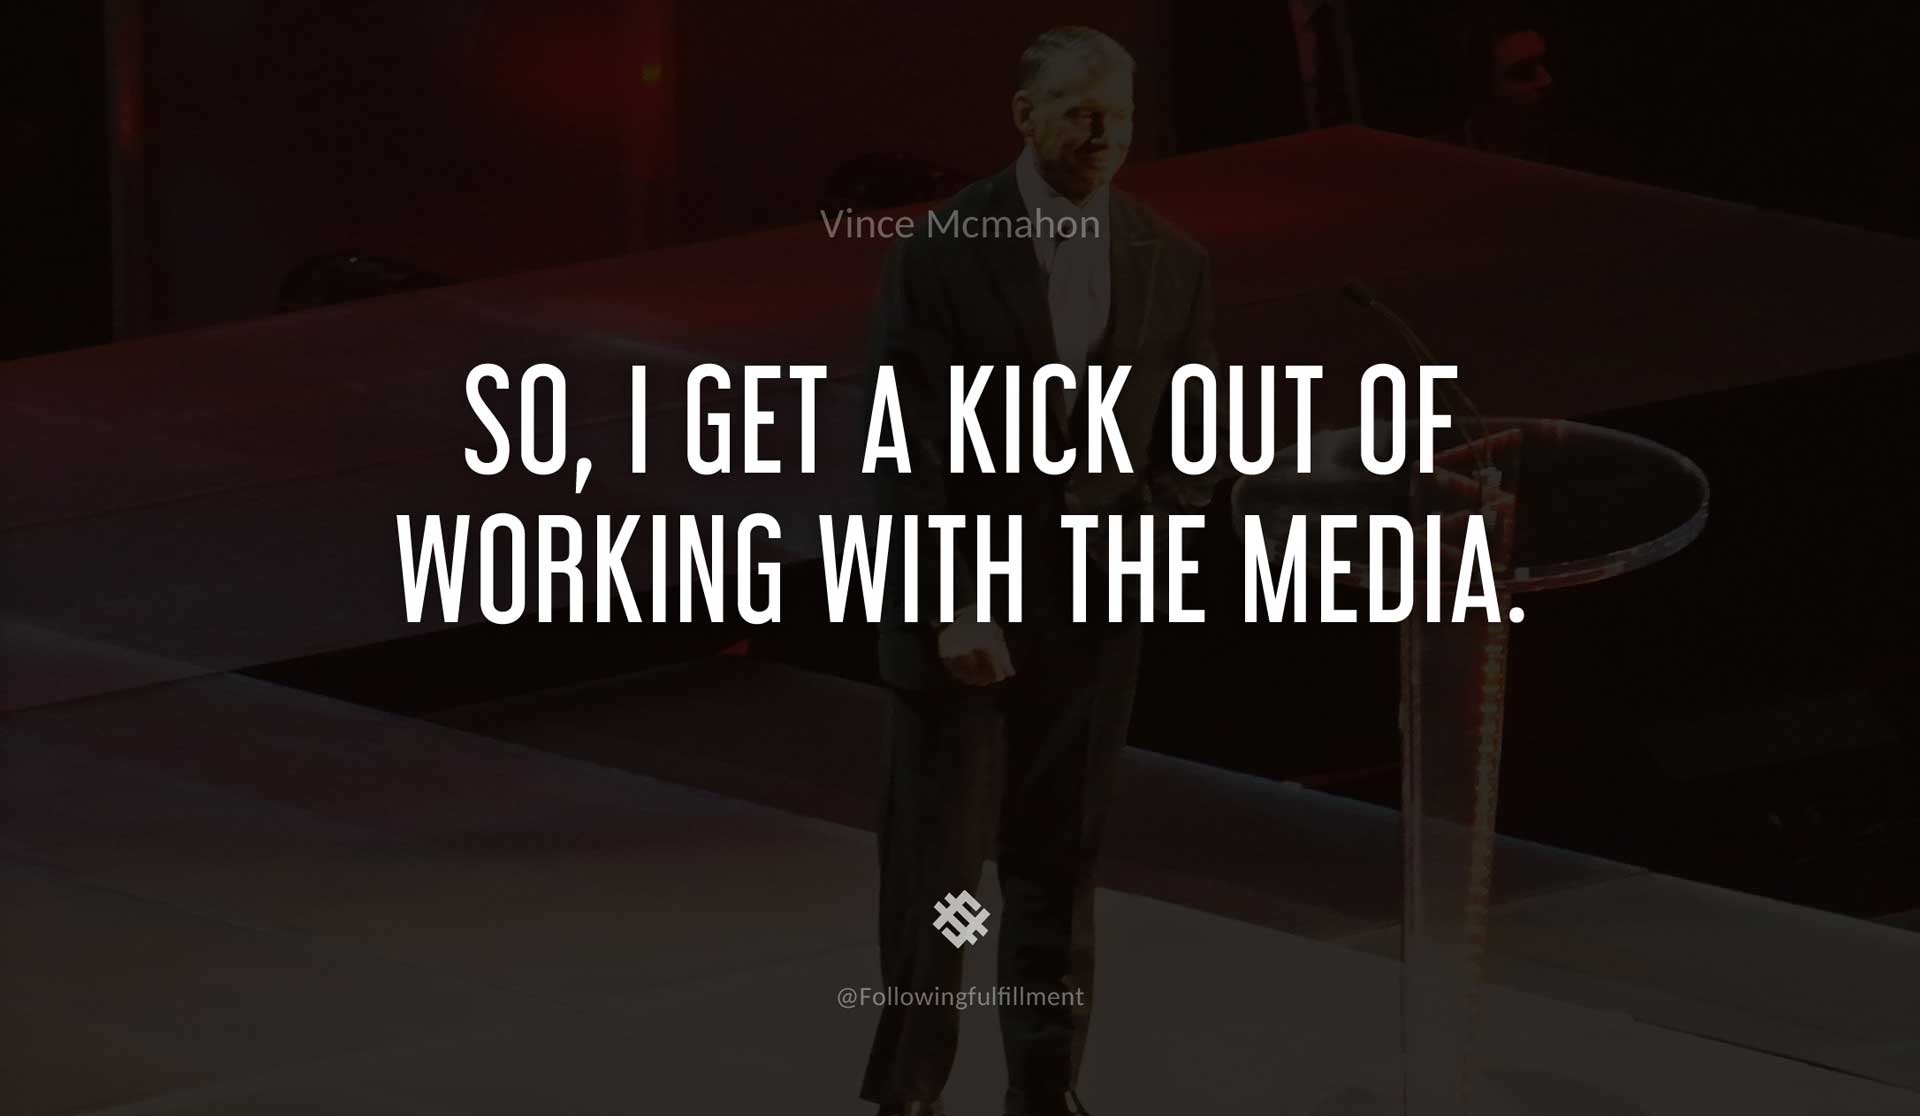 So,-I-get-a-kick-out-of-working-with-the-media.-VINCE-MCMAHON-Quote.jpg